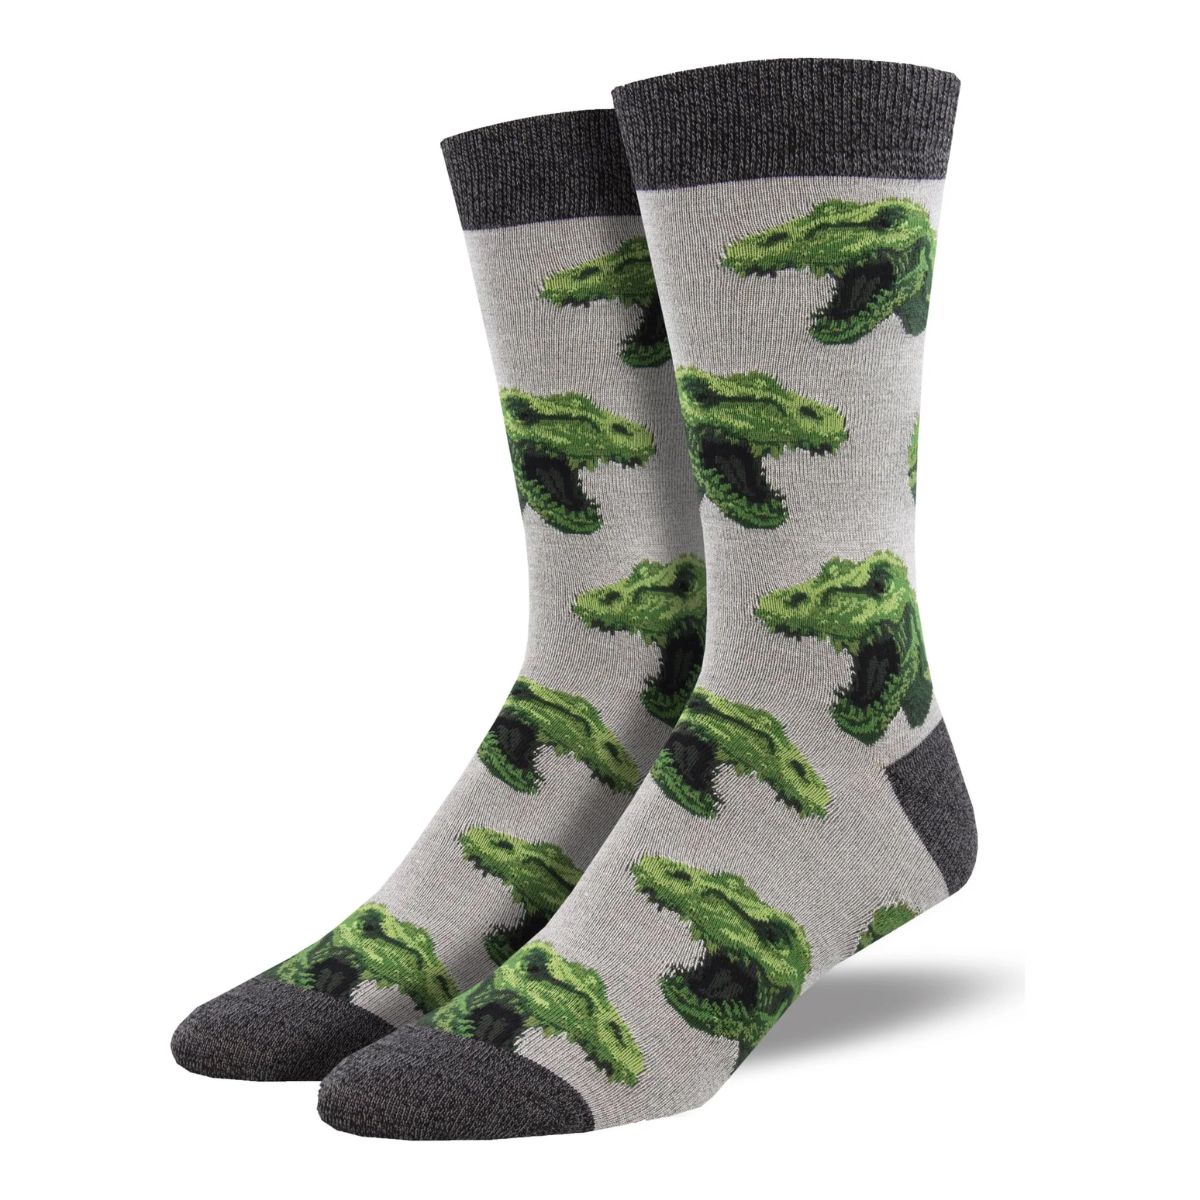 Rex your muscle socks a pair of grey crew socks with dinosaur print.